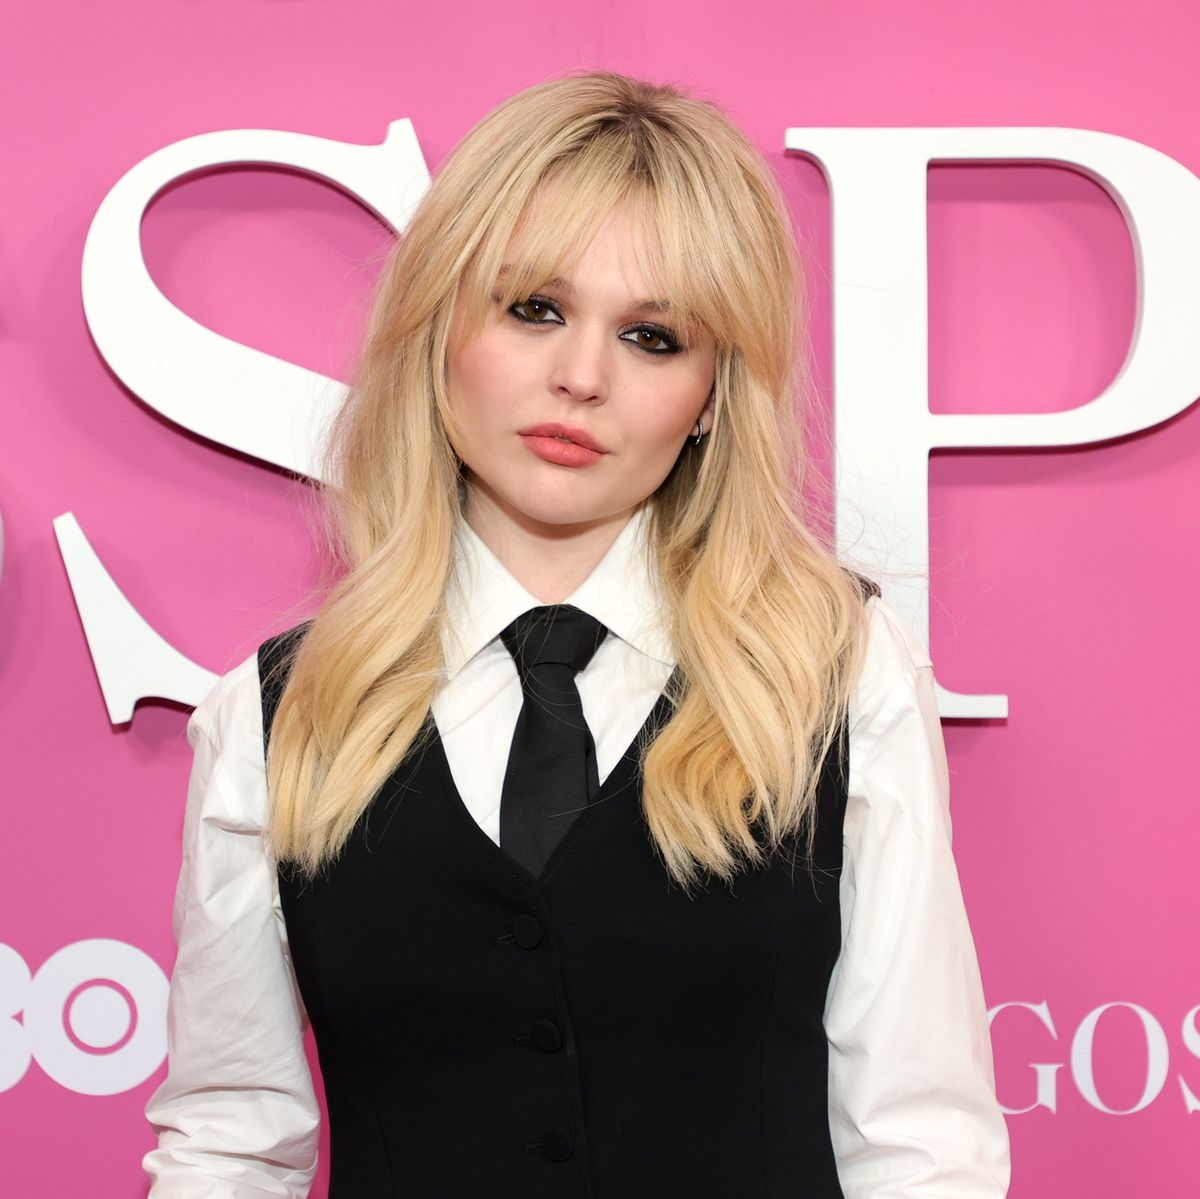 Who is Emily Alyn Lind? - Meet One of the Stars of 'Gossip Girl